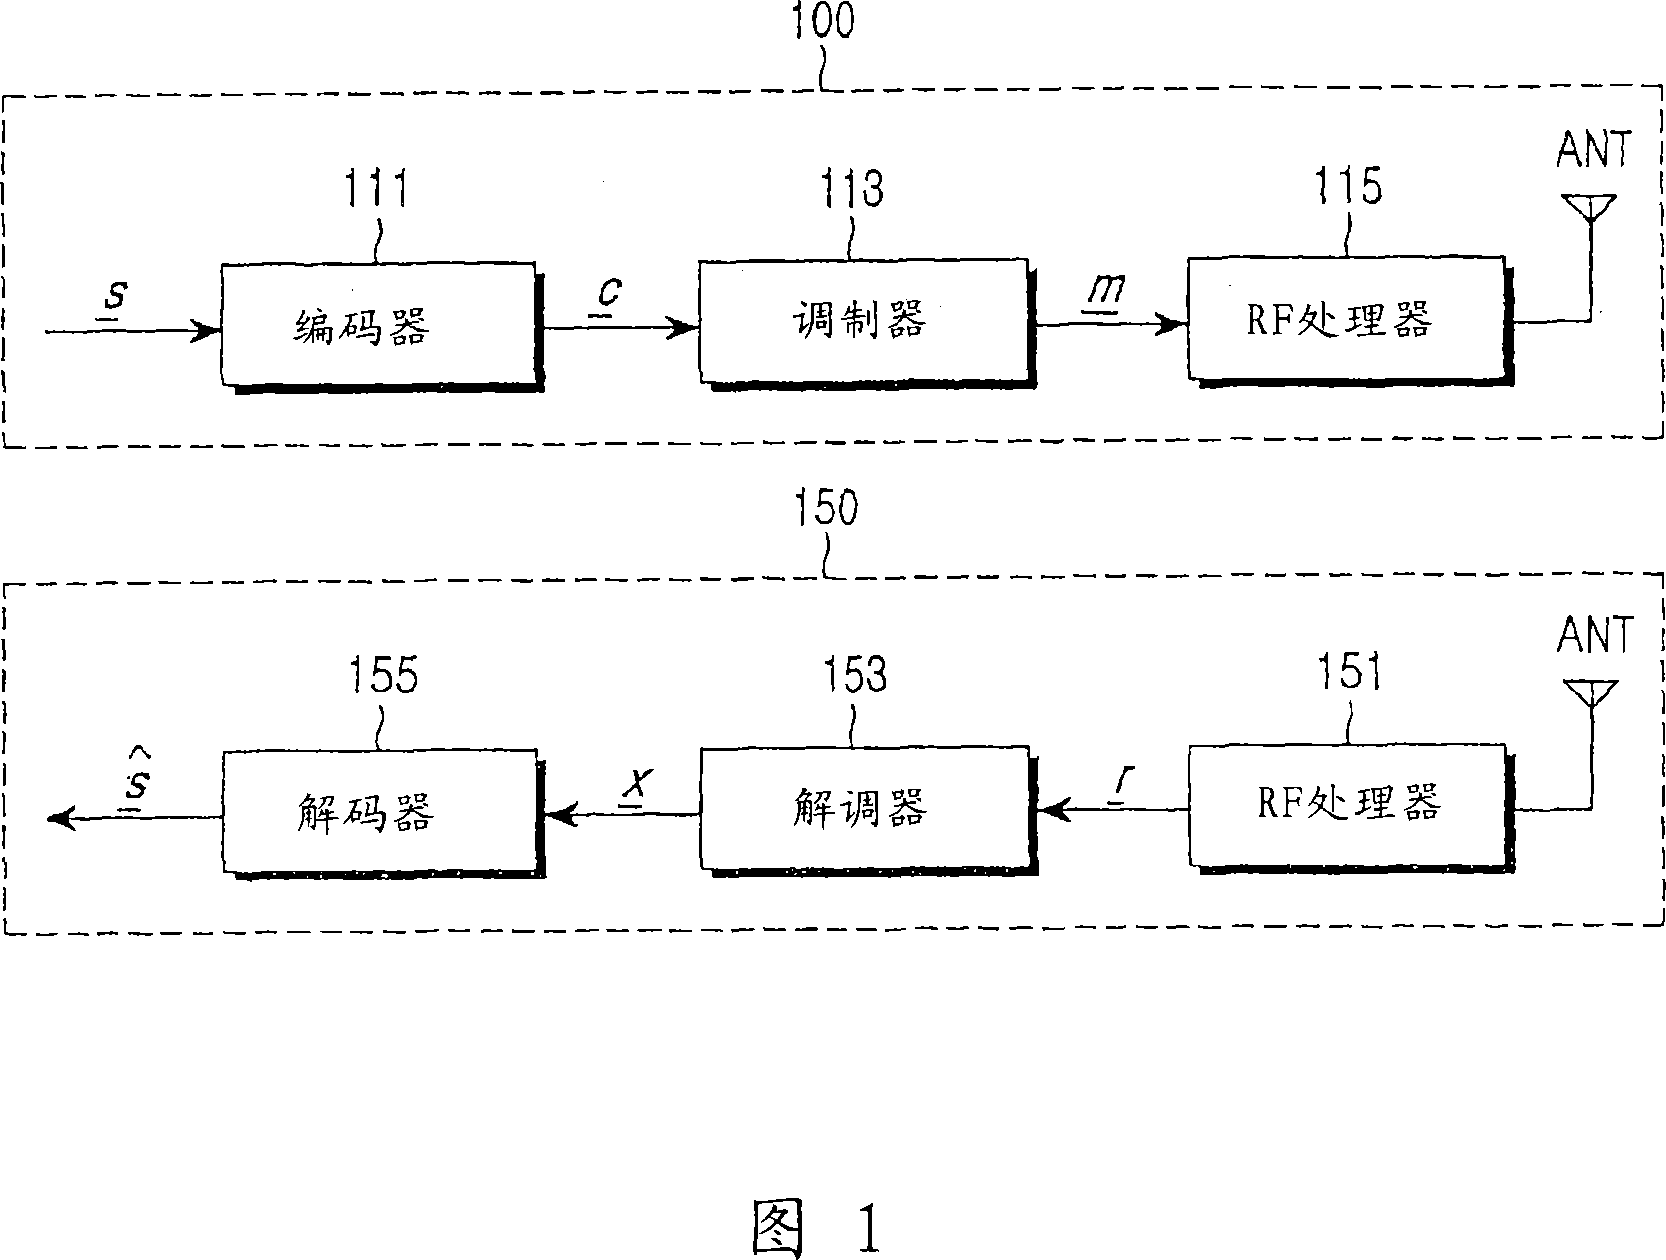 Apparatus and method for transmitting and receiving a signal in a communication system